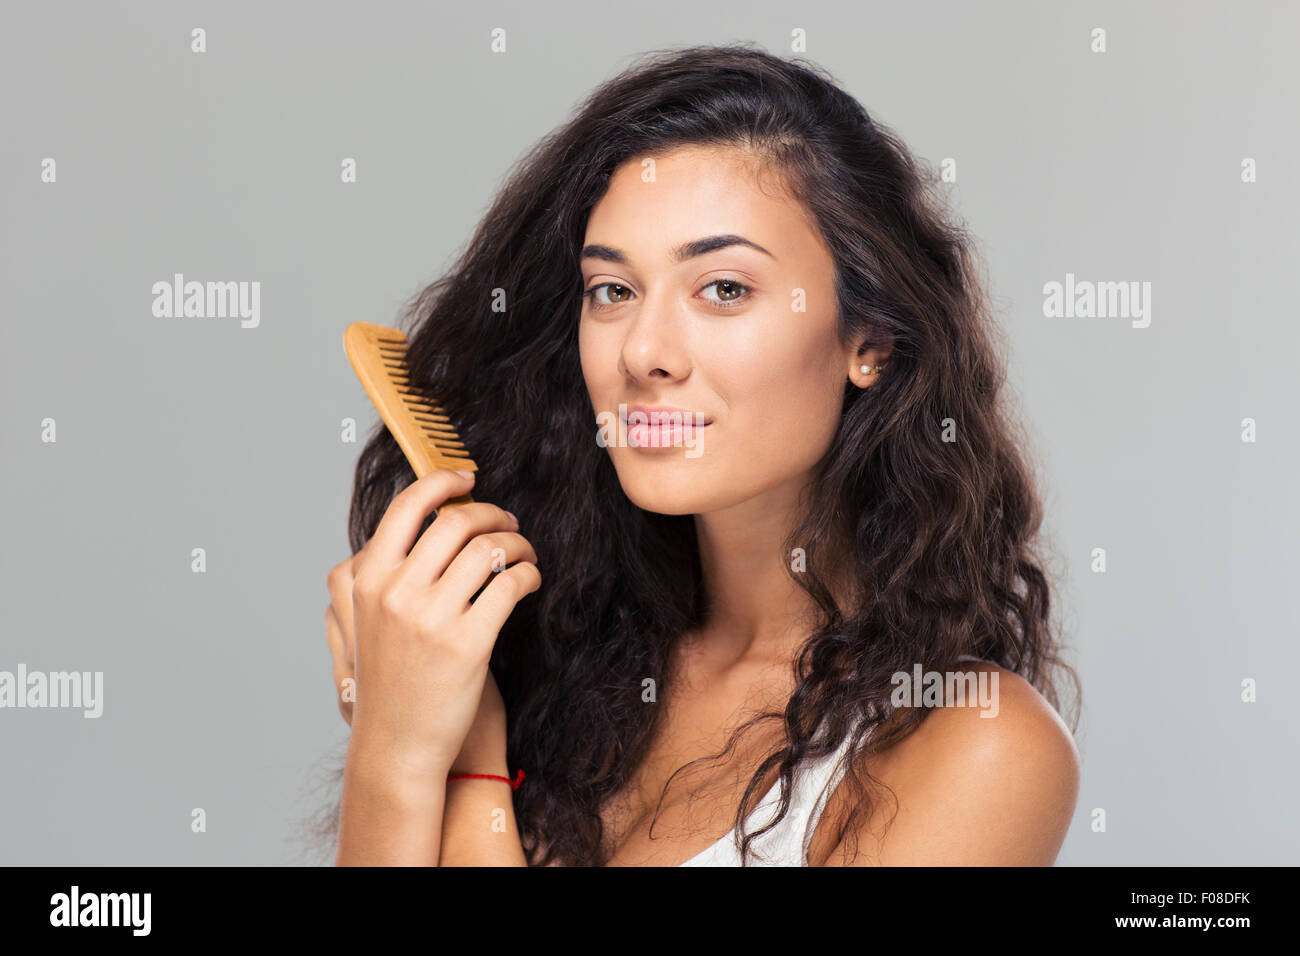 Happy cute woman combing her hair over gray background. Looking at camera Stock Photo